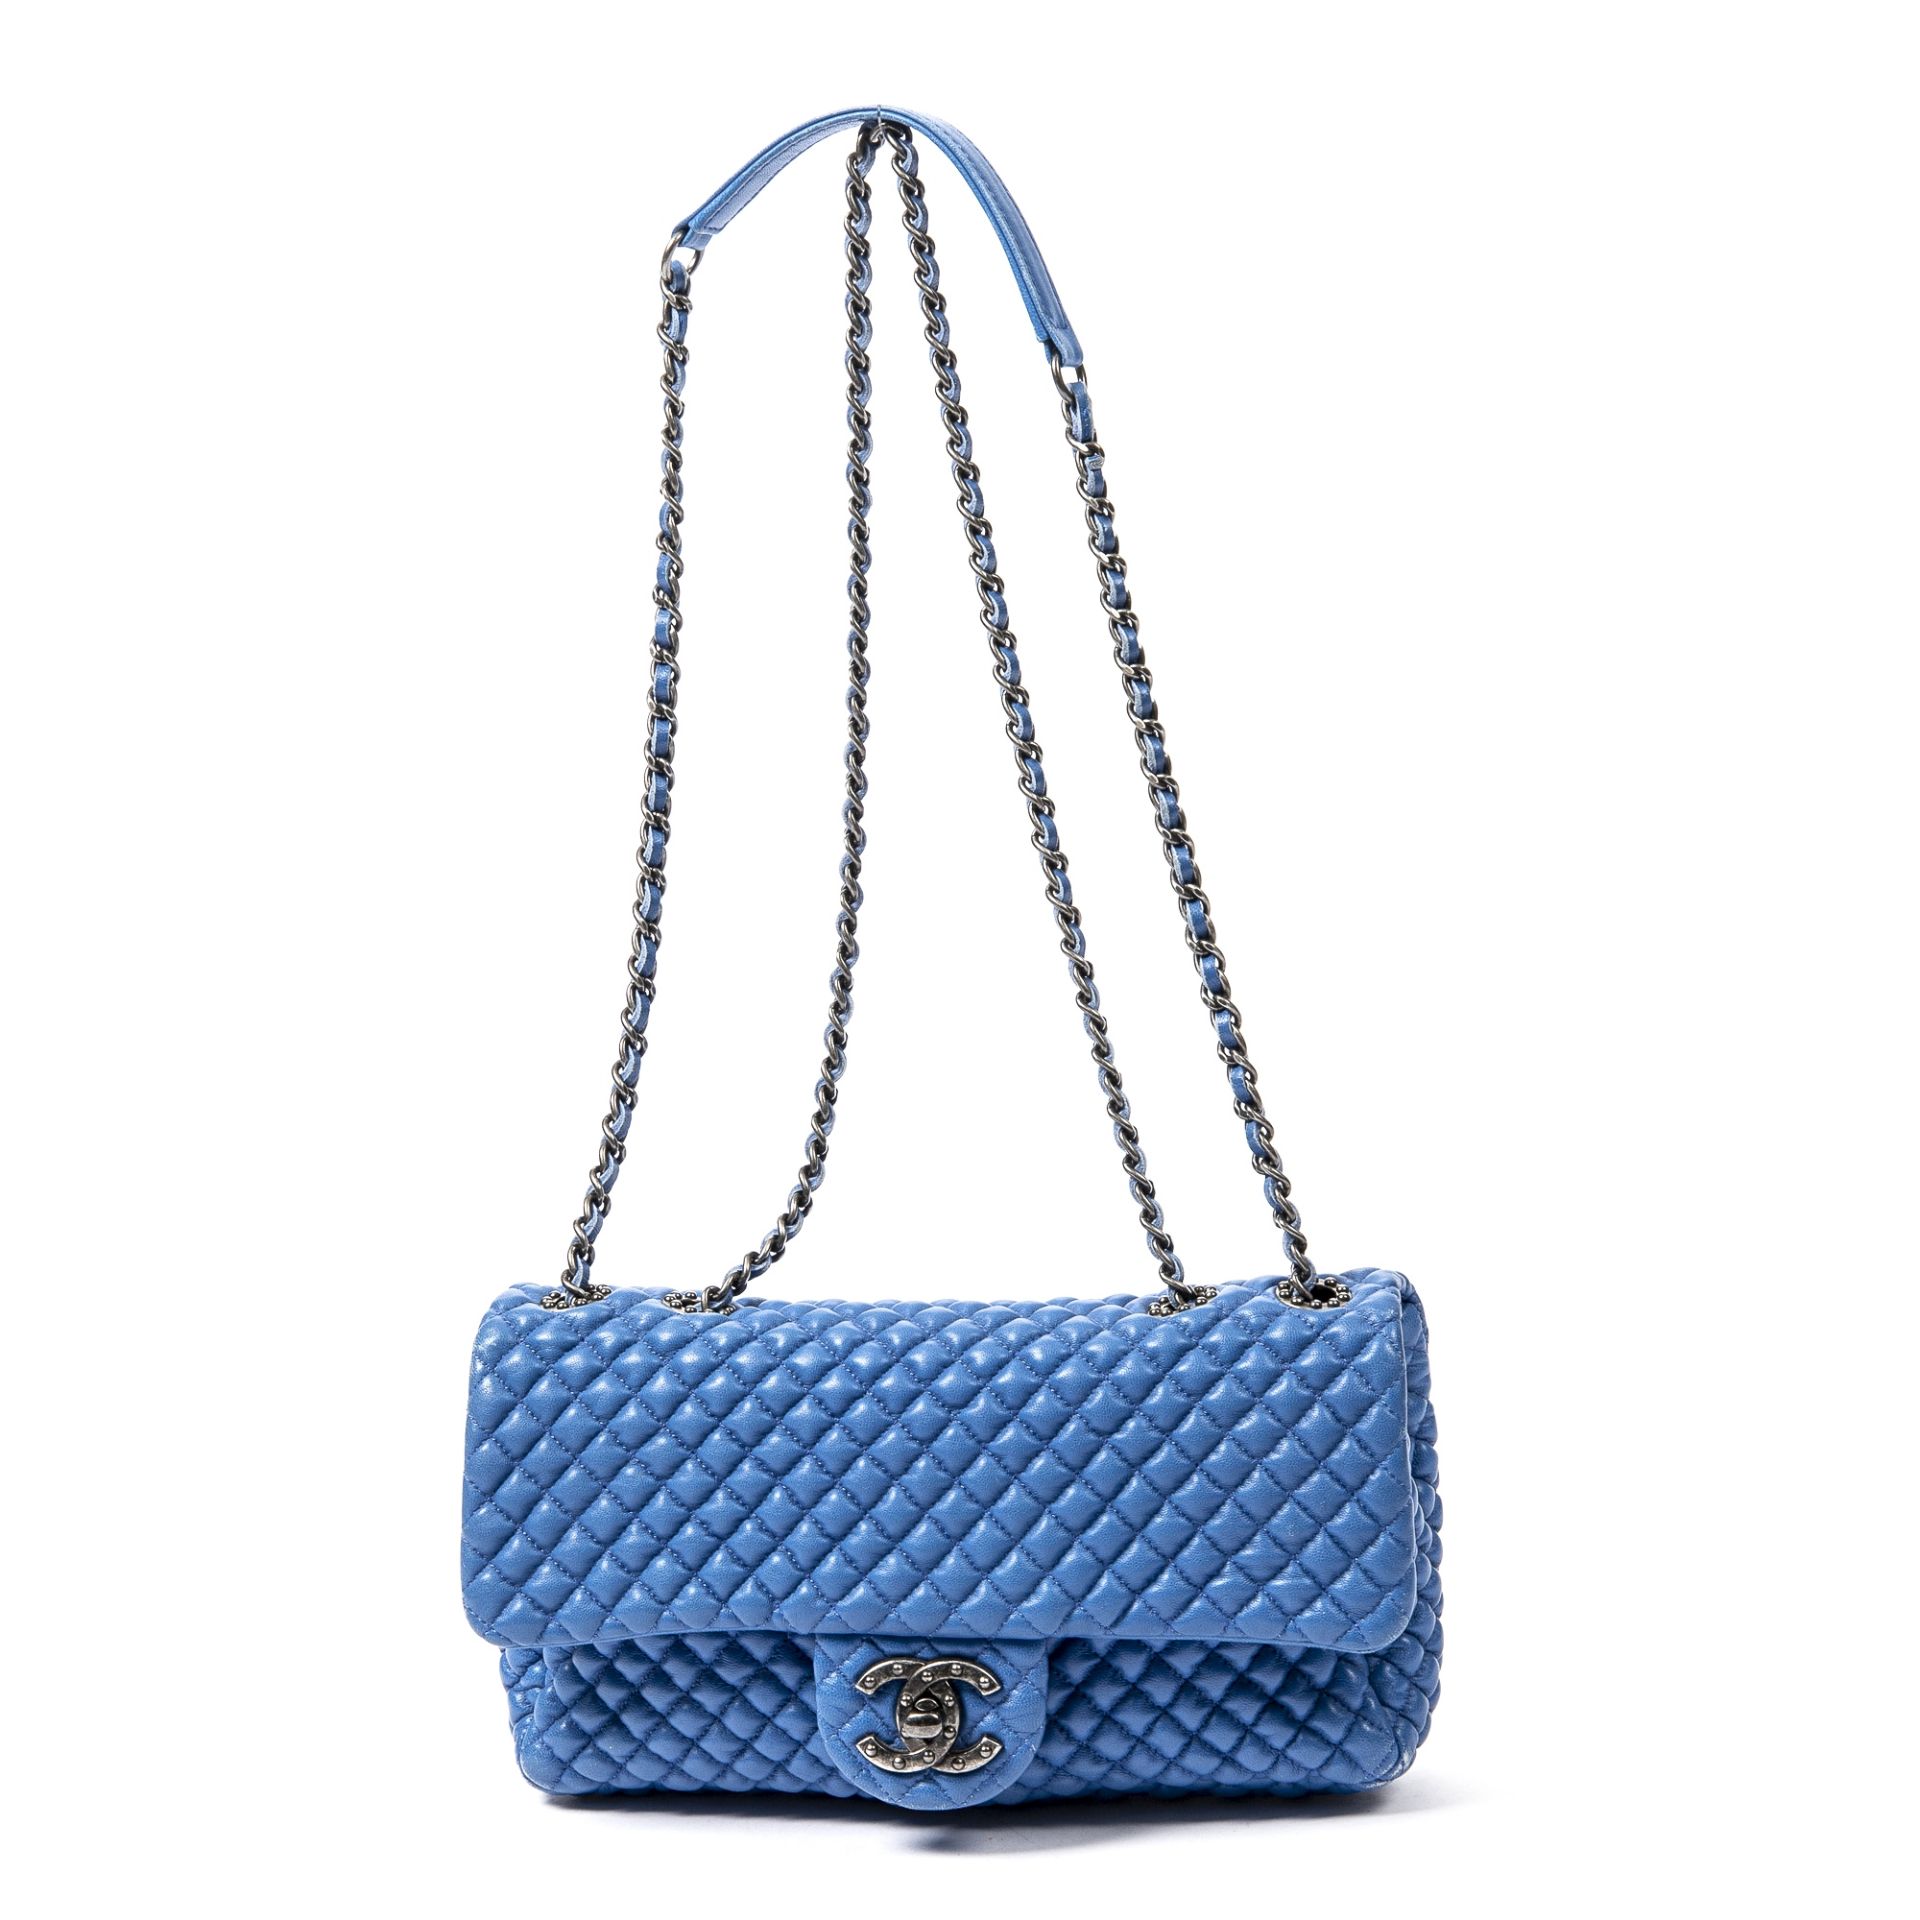 Blue Micro Quilted Flap Bag, Chanel, c. 2015-16, (Includes serial sticker and authenticity card)